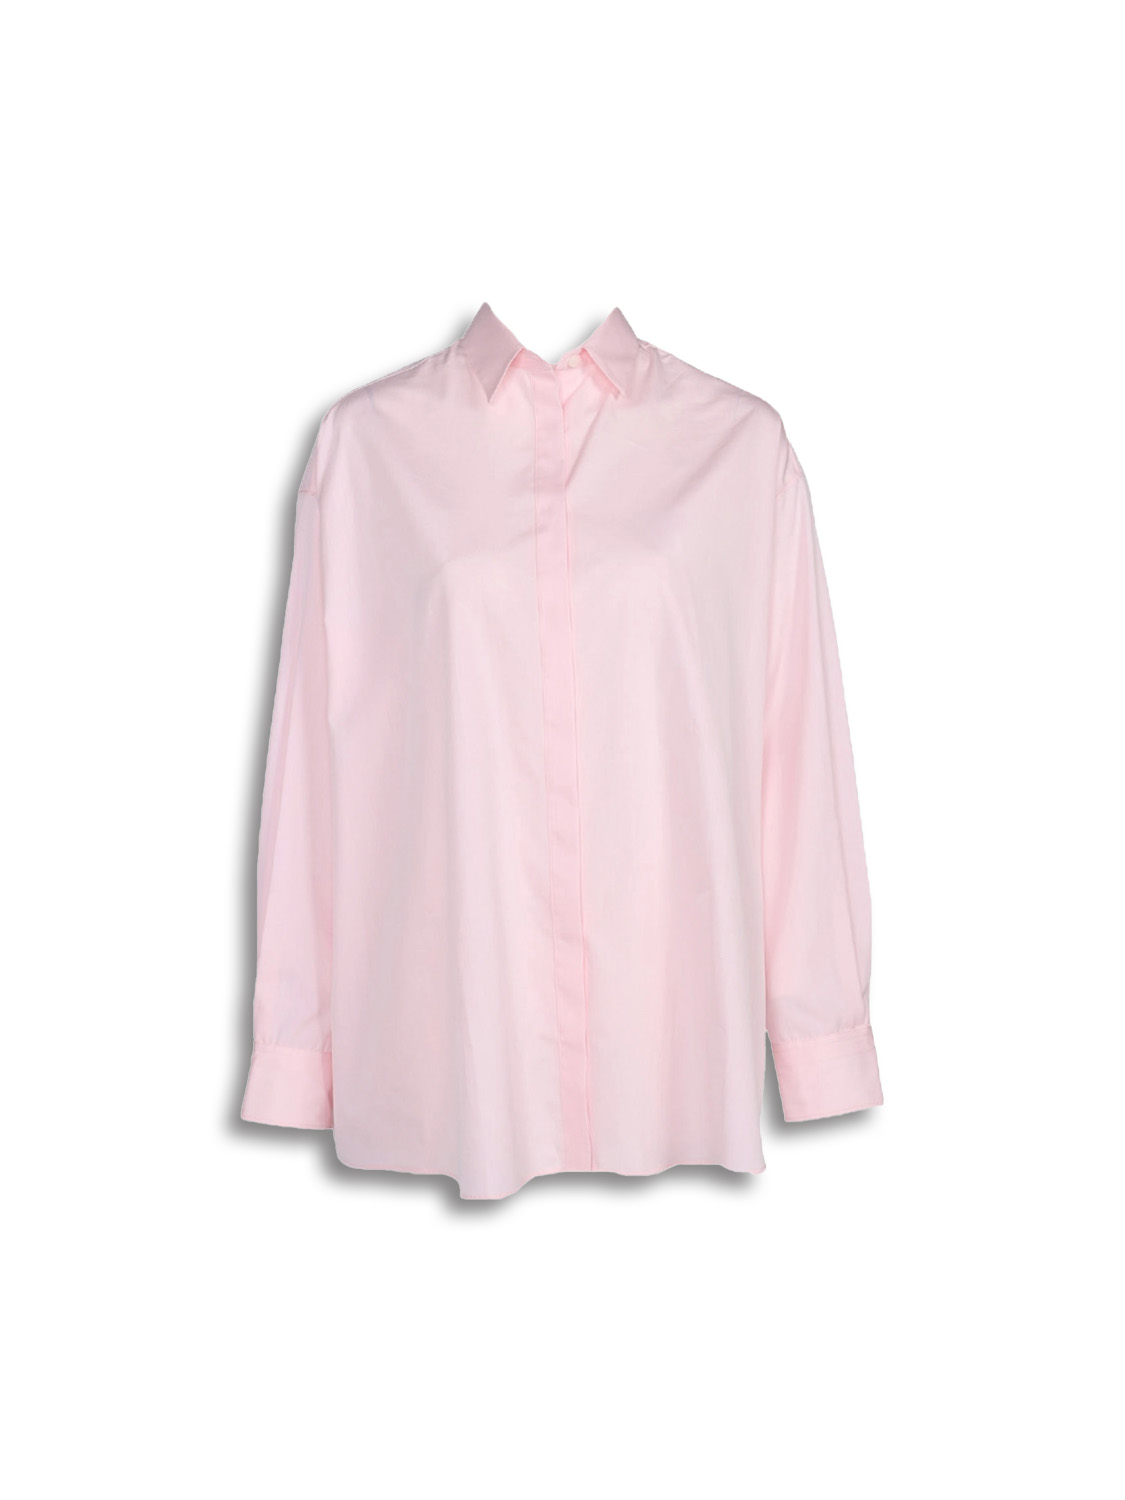 Wide cut cotton blouse with concealed button placket